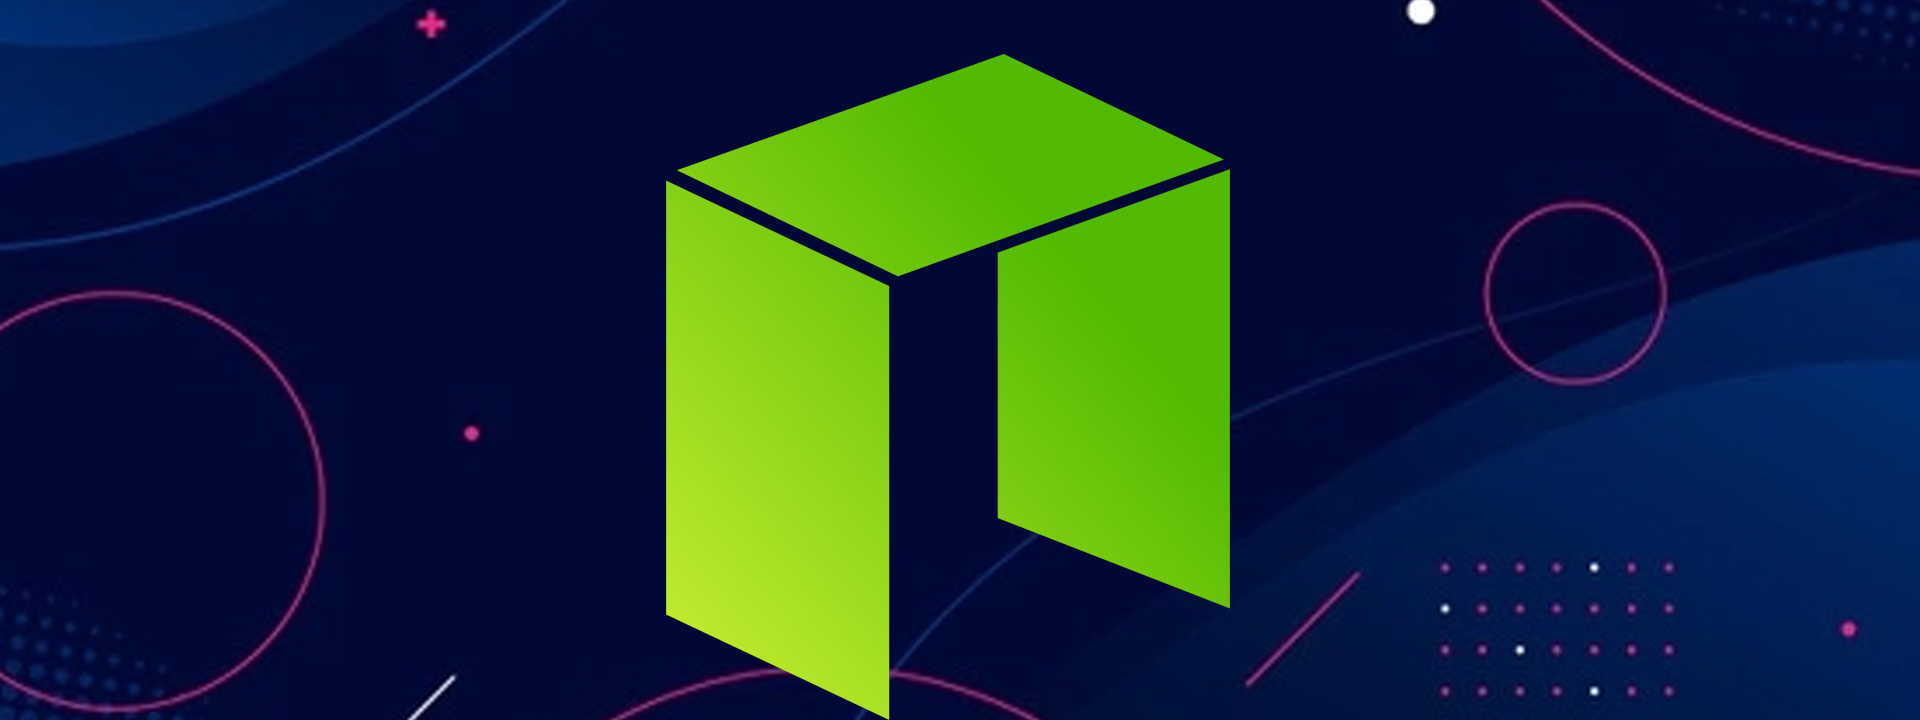 NEO Price Prediction: NEO bulls defended $6.00 and formed a strong bullish reversal candle 